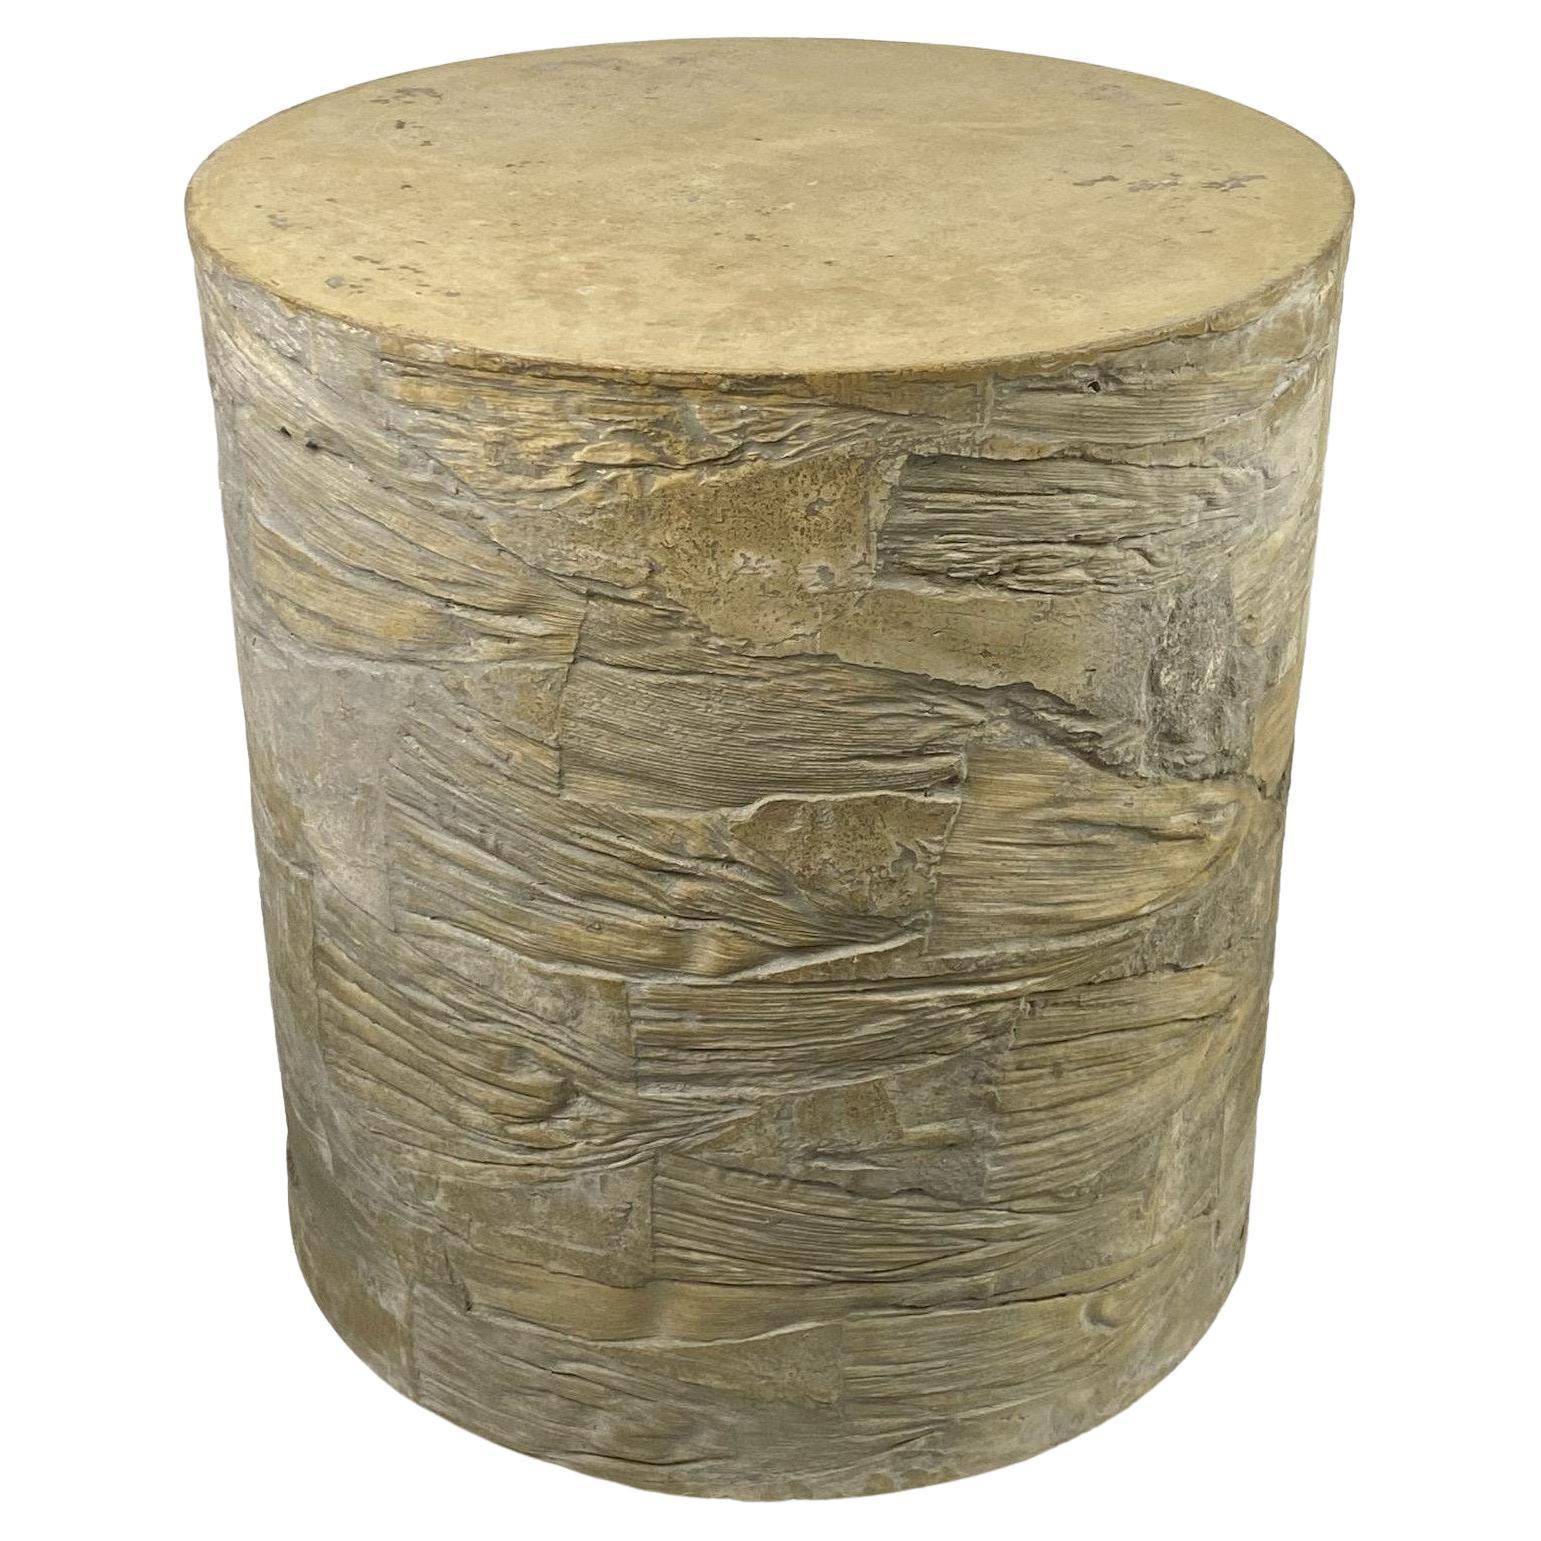 Rustic Yellow Concrete Stool with Textured Corn Husk Imprints, 'Switchback' For Sale